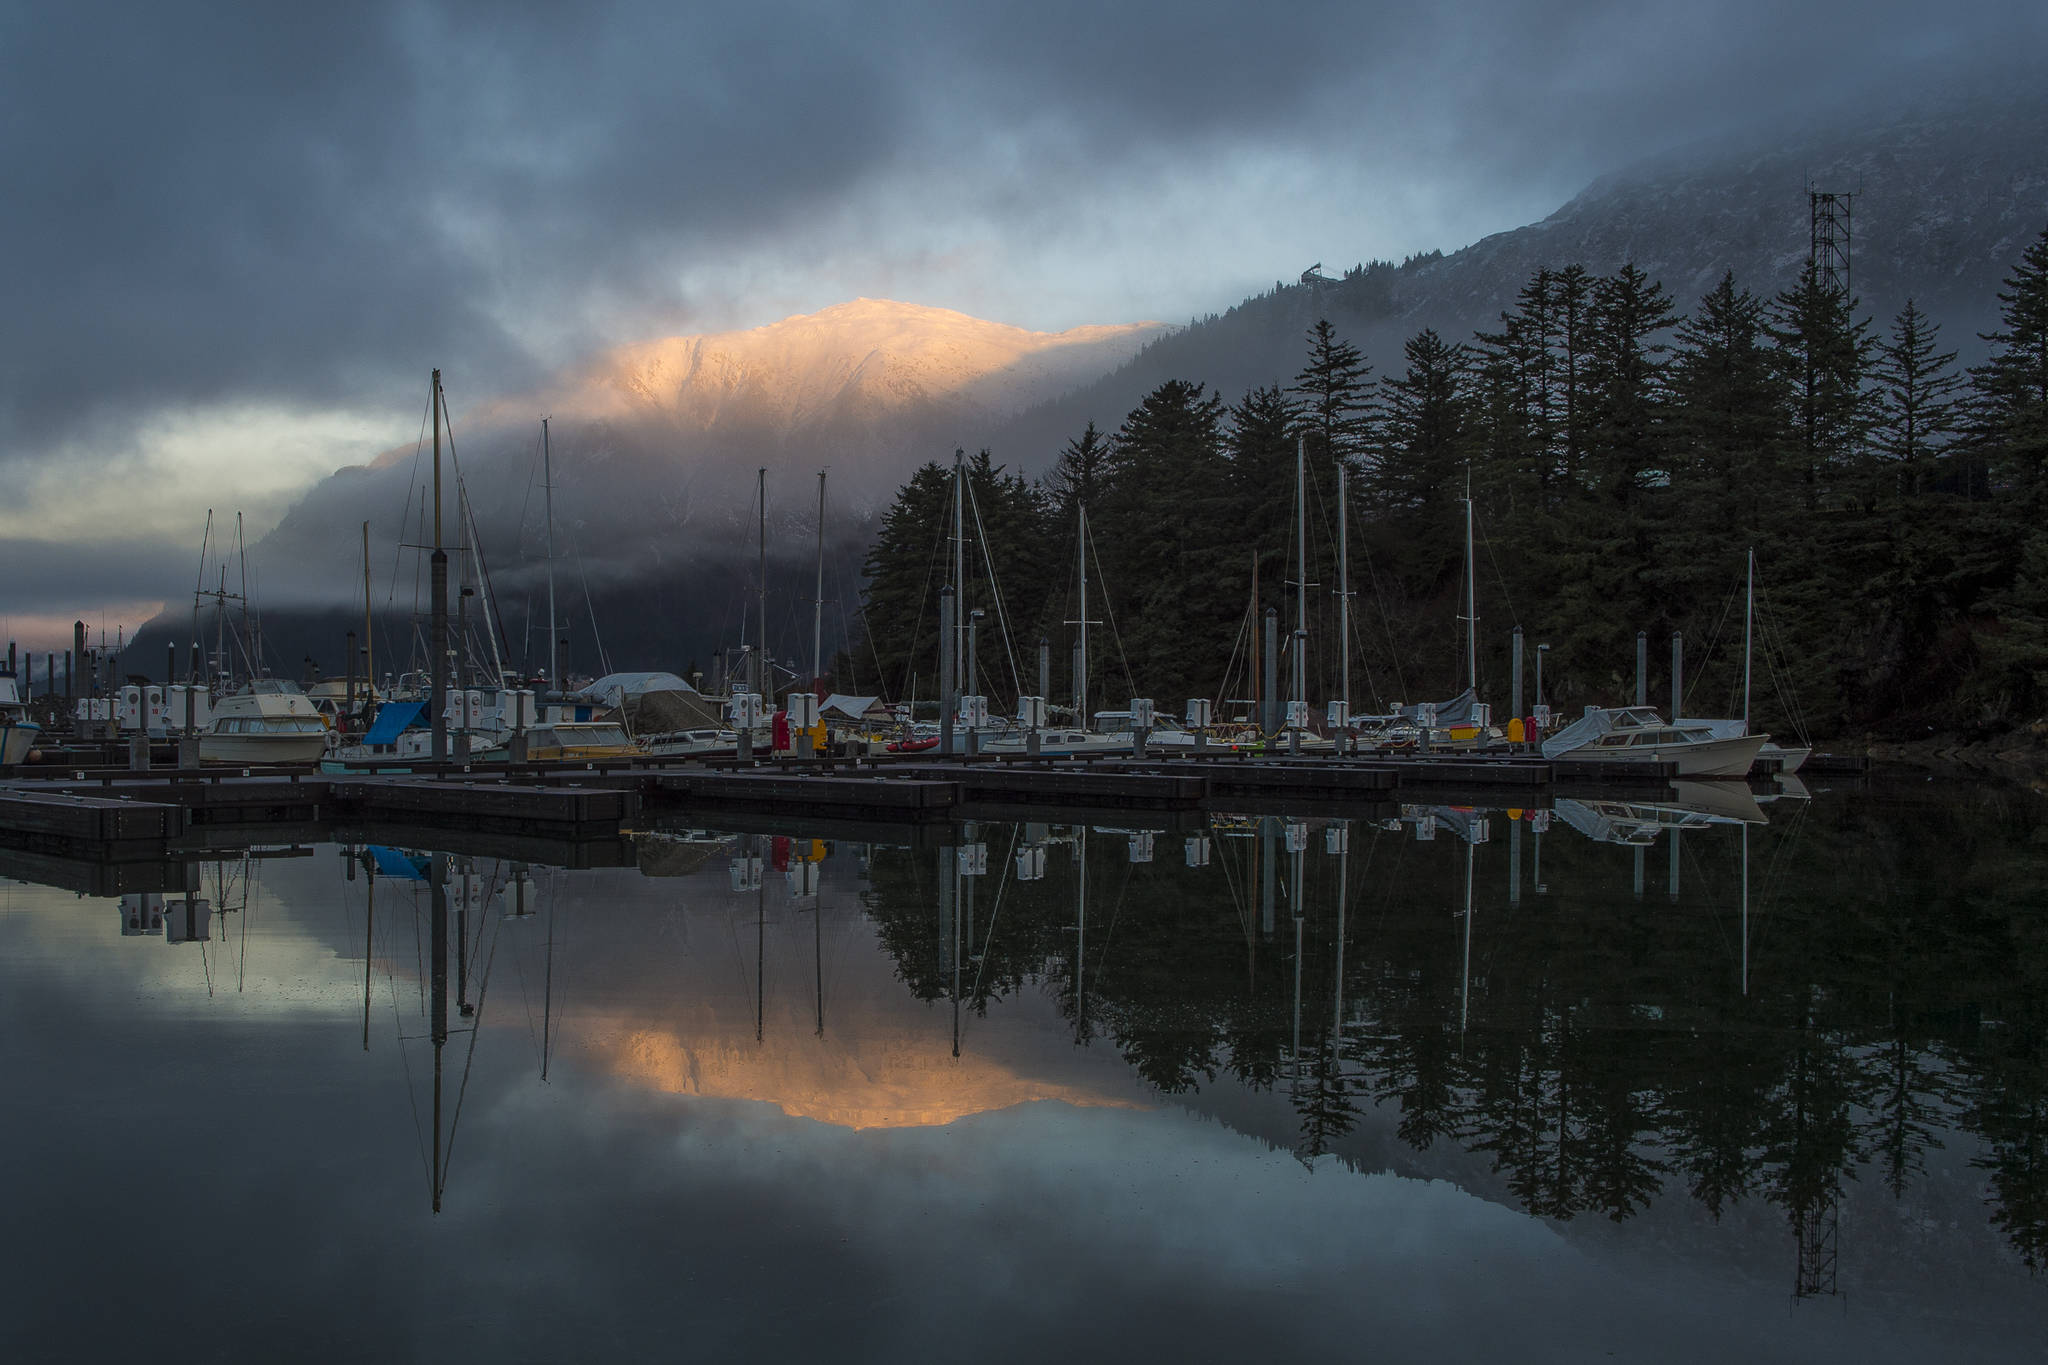 Mount Juneau catches the first rays of sunrise as seen from the Mike Pusich Douglas Boat Harbor on Thursday, Jan. 3, 2019. (Michael Penn | Juneau Empire)